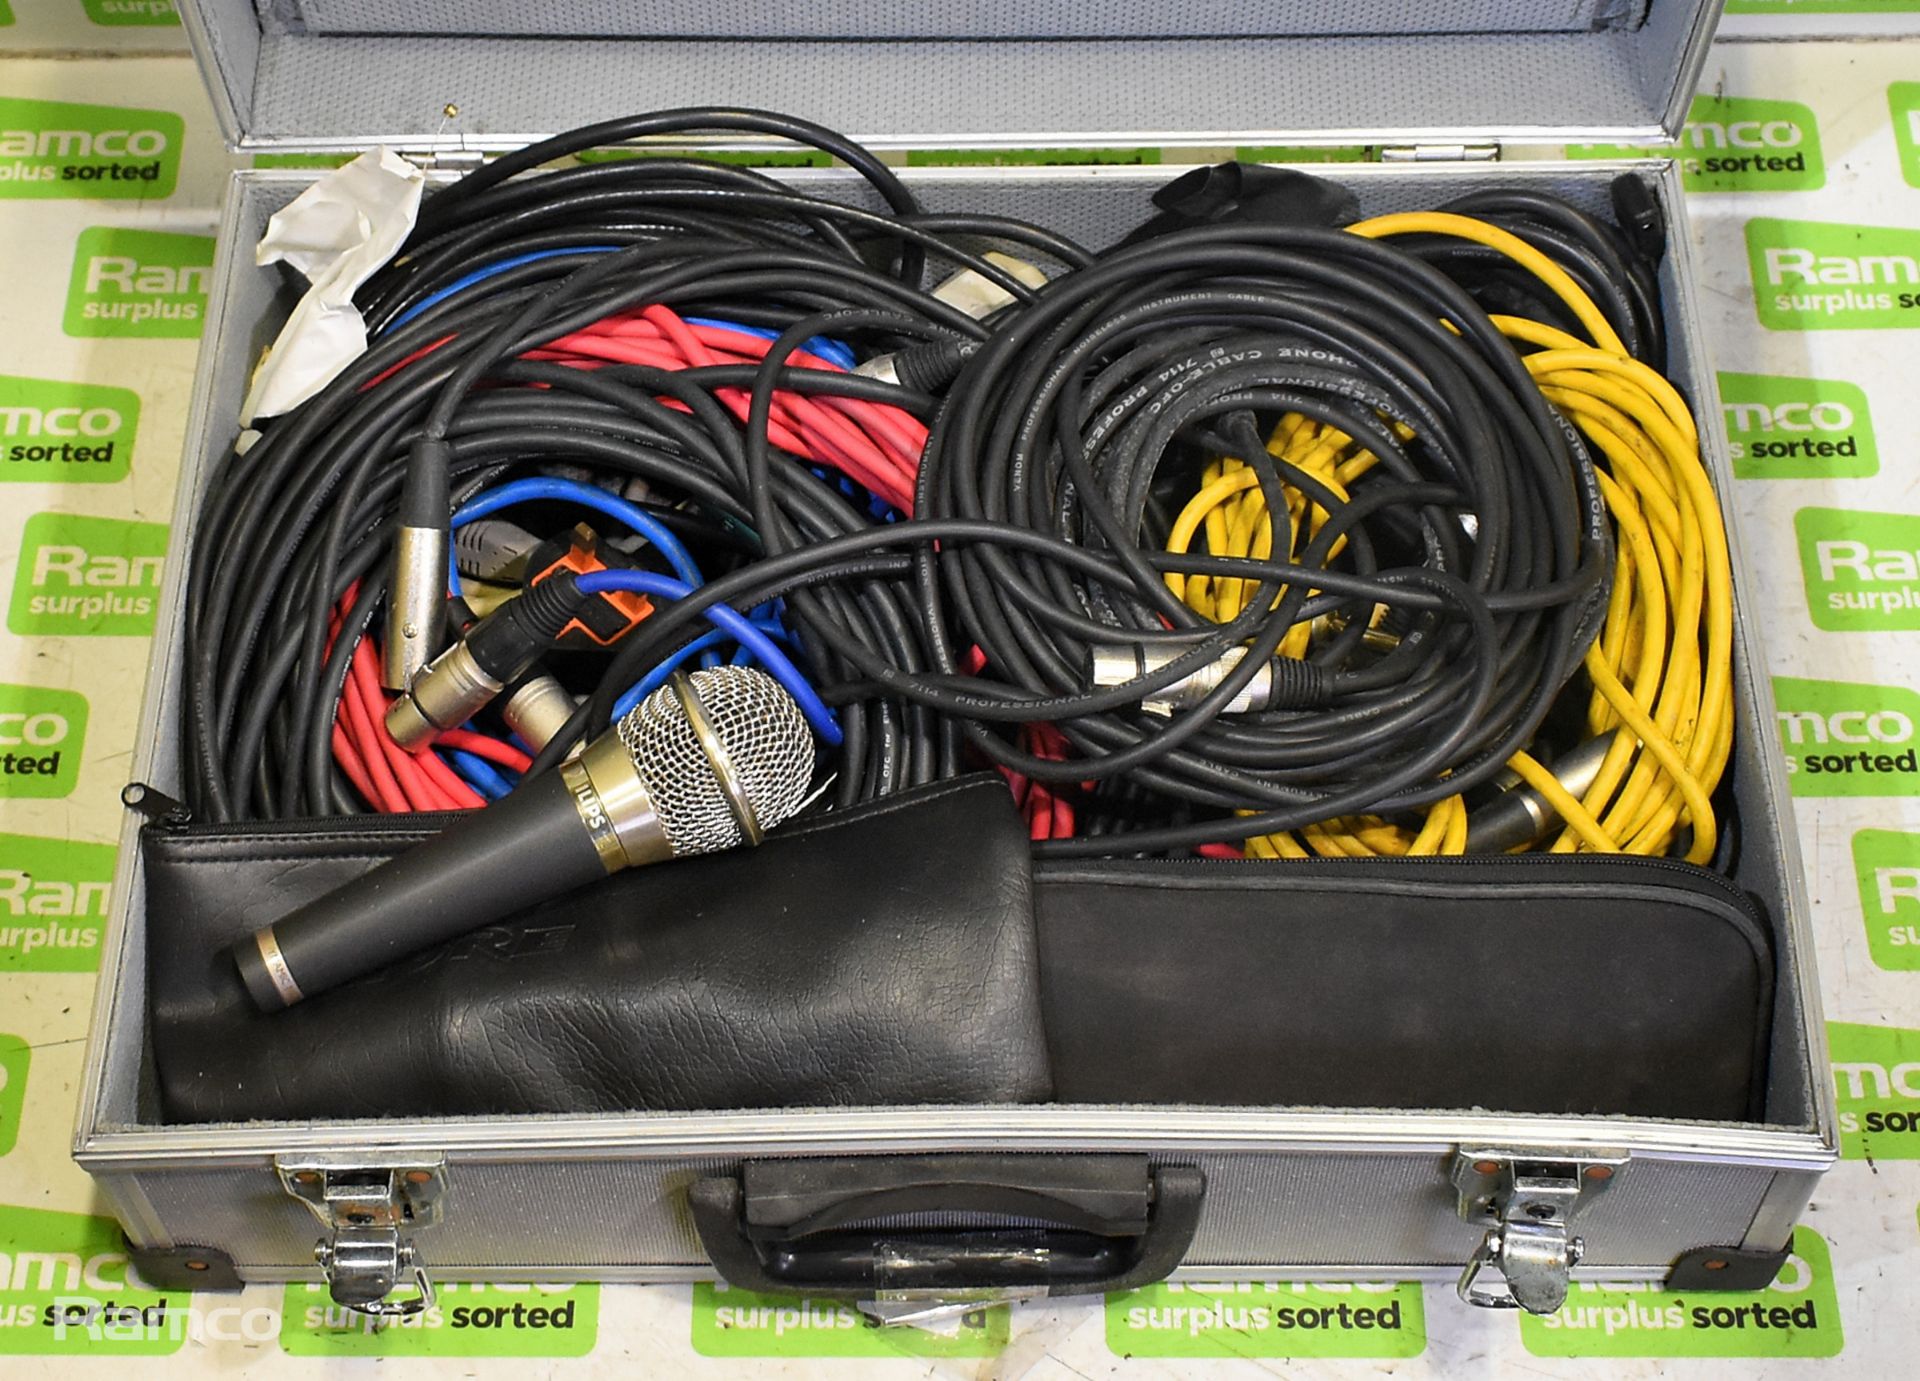 Philips MD600, Shure SM58 and Beyerdynamic TG-X80 microphones with cables in storage case - Image 2 of 7